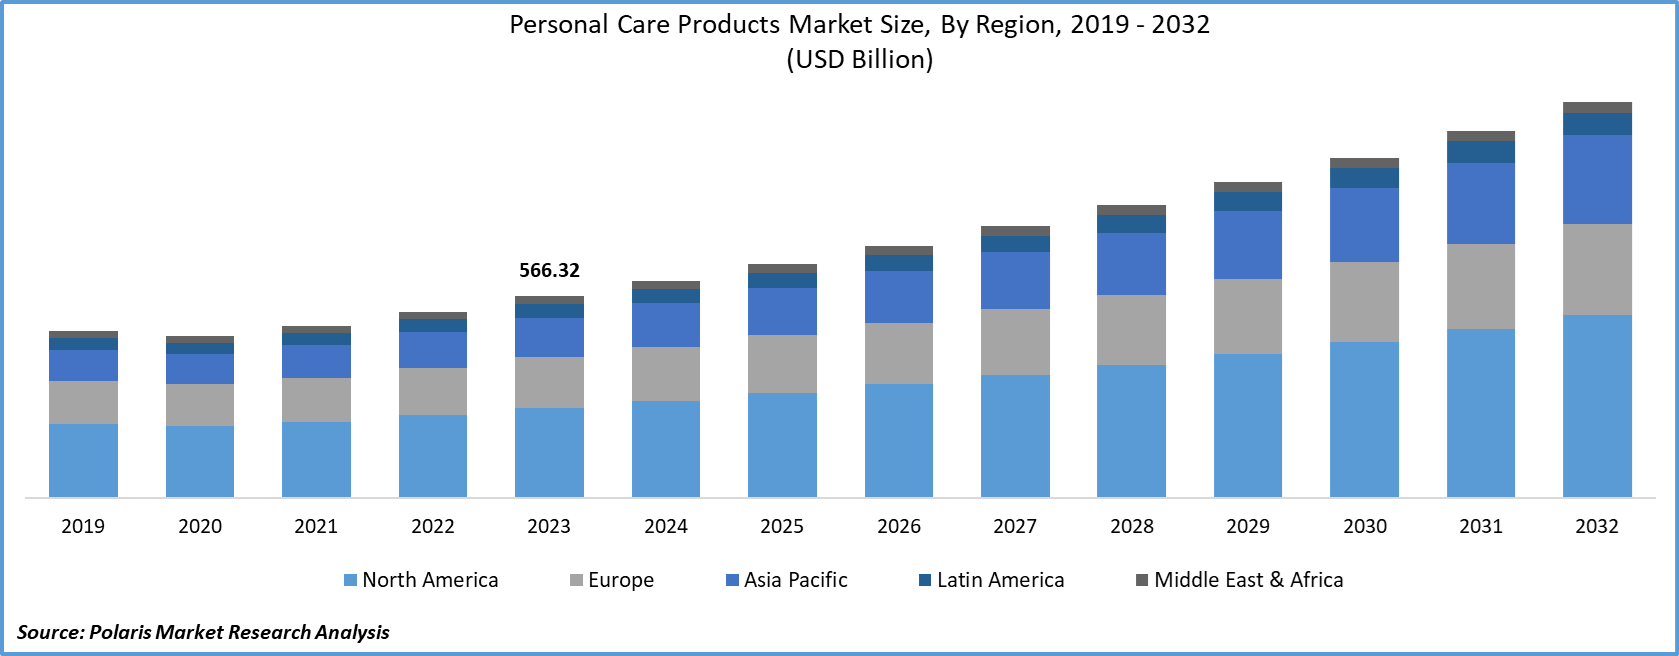 Personal Care Products Market Size